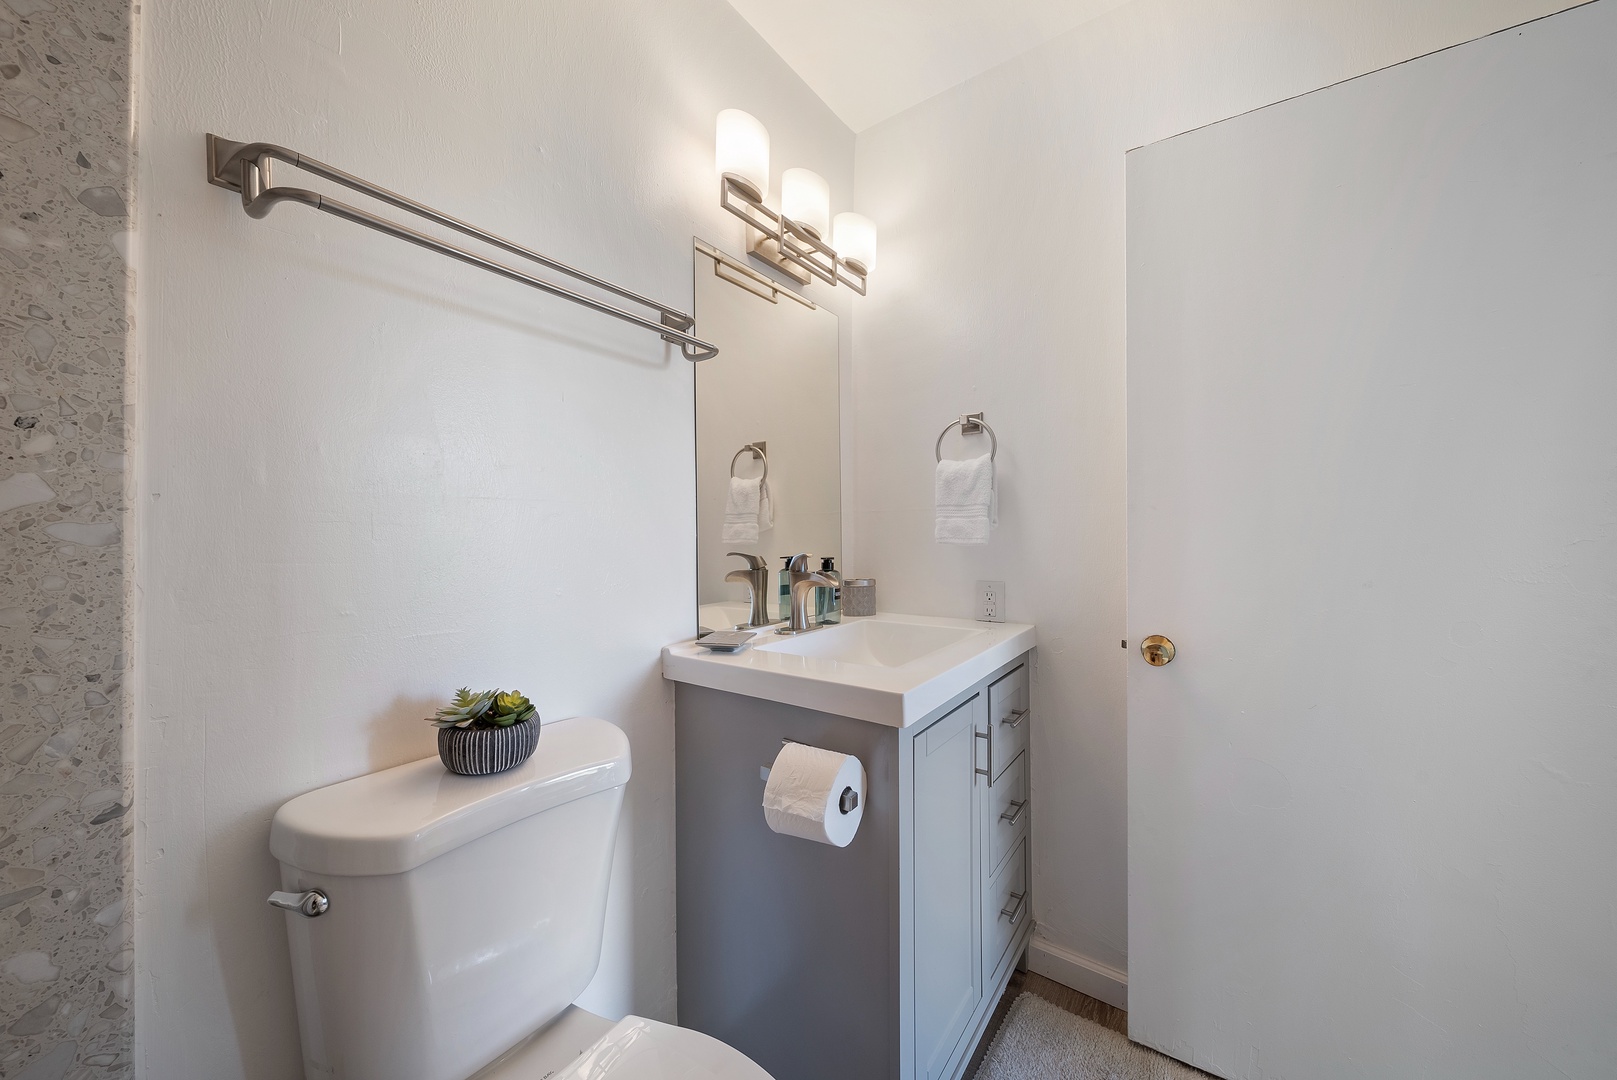 Kahuku Vacation Rentals, Kuilima Estates West #85 - Downstairs Ensuite bathroom with main bedroom.